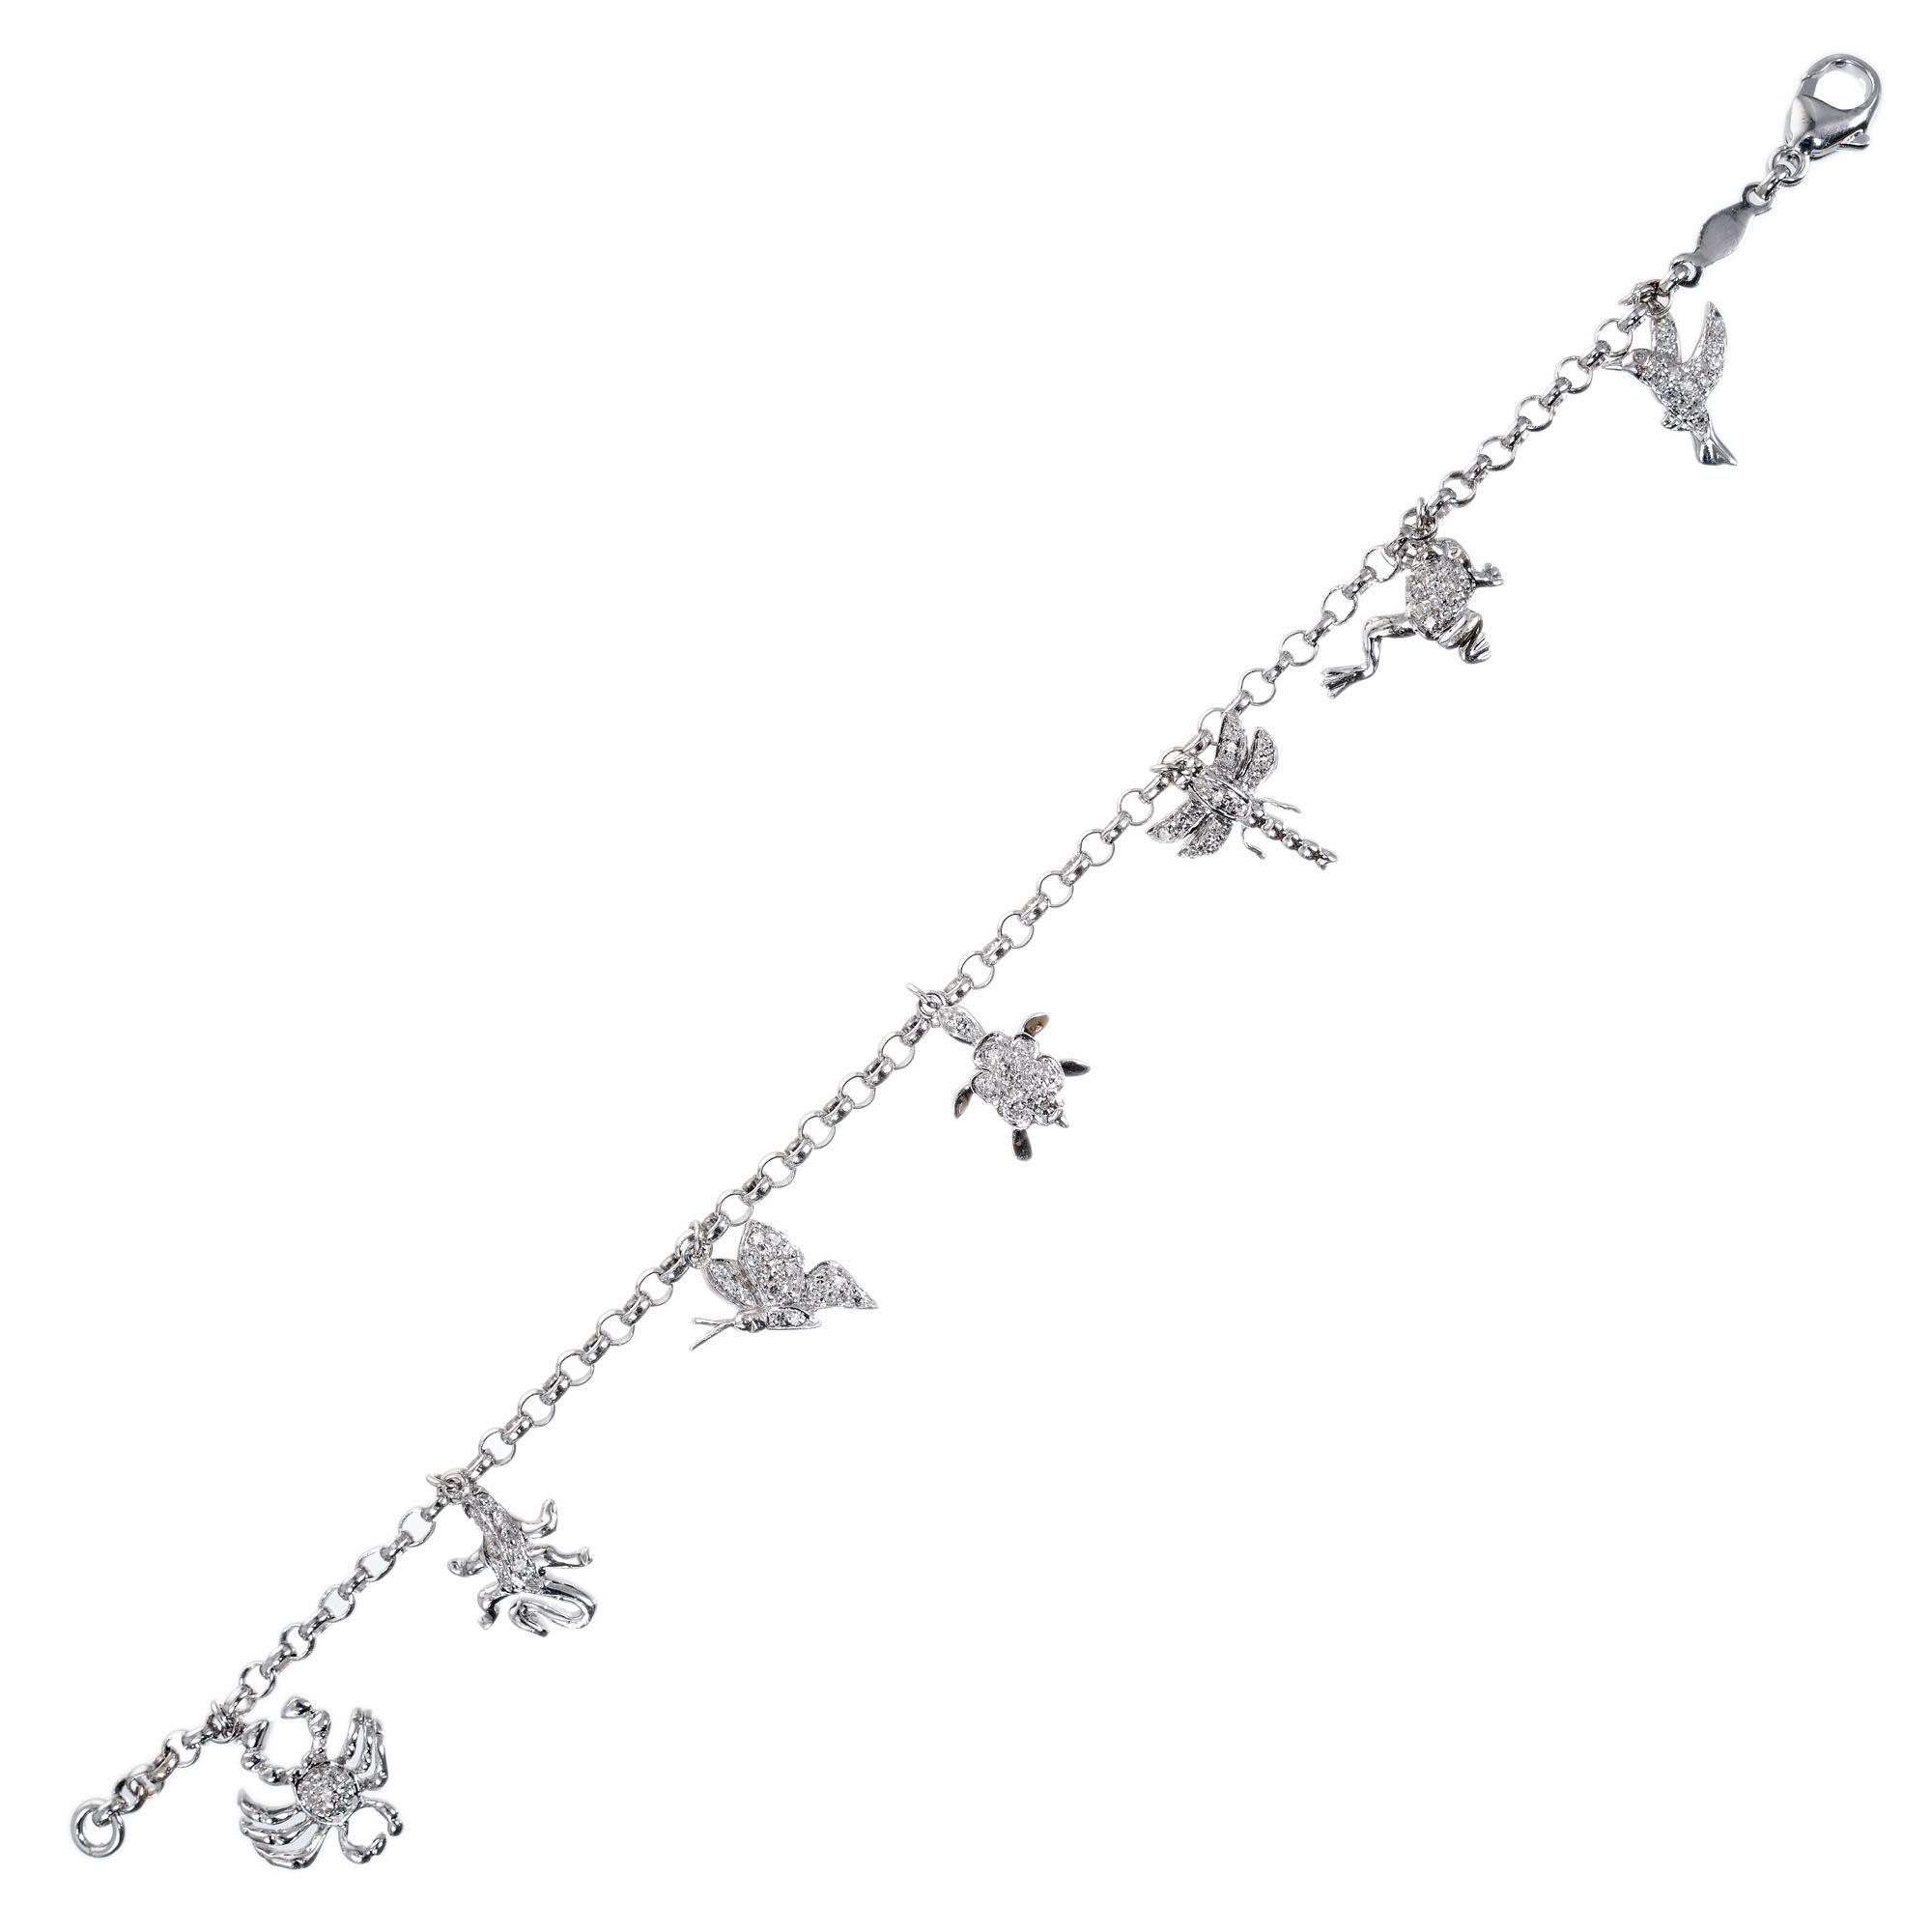 Vintage mid-century 1950's 14k white gold charm bracelet with 7 Diamond studded charms. Crab, Lizard, Butterfly, Turtle, Dragonfly, Frog & Hummingbird. 7 inches in length

87 single cut Diamonds, approx. total weight .22cts, H – I, SI – I
14k white